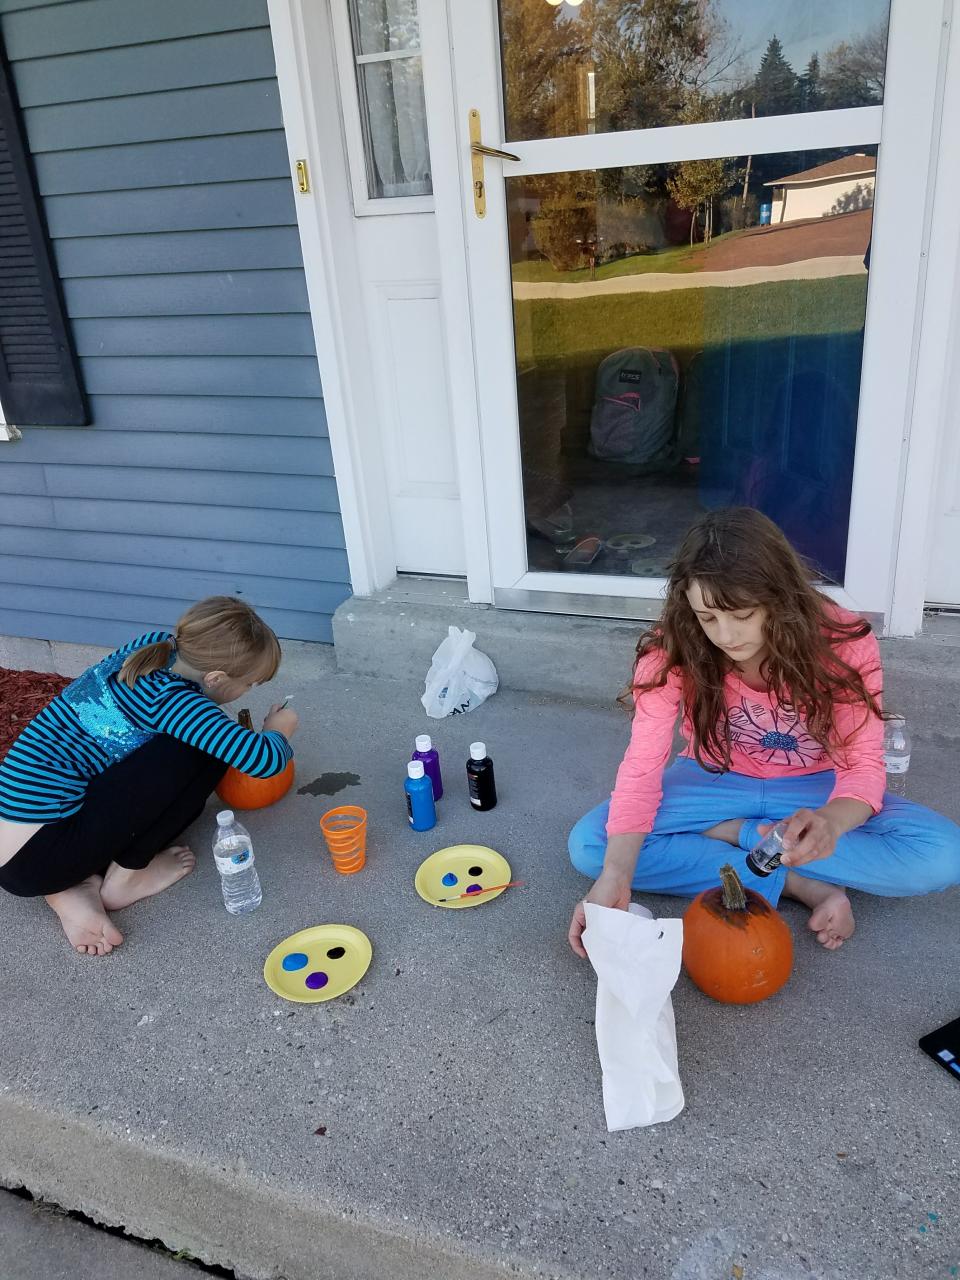 Wendy and Alex Schwabe work on painting pumpkins teal in order to participate in the Teal Pumpkin Project to include children with food allergies in trick-or-treating celebrations.